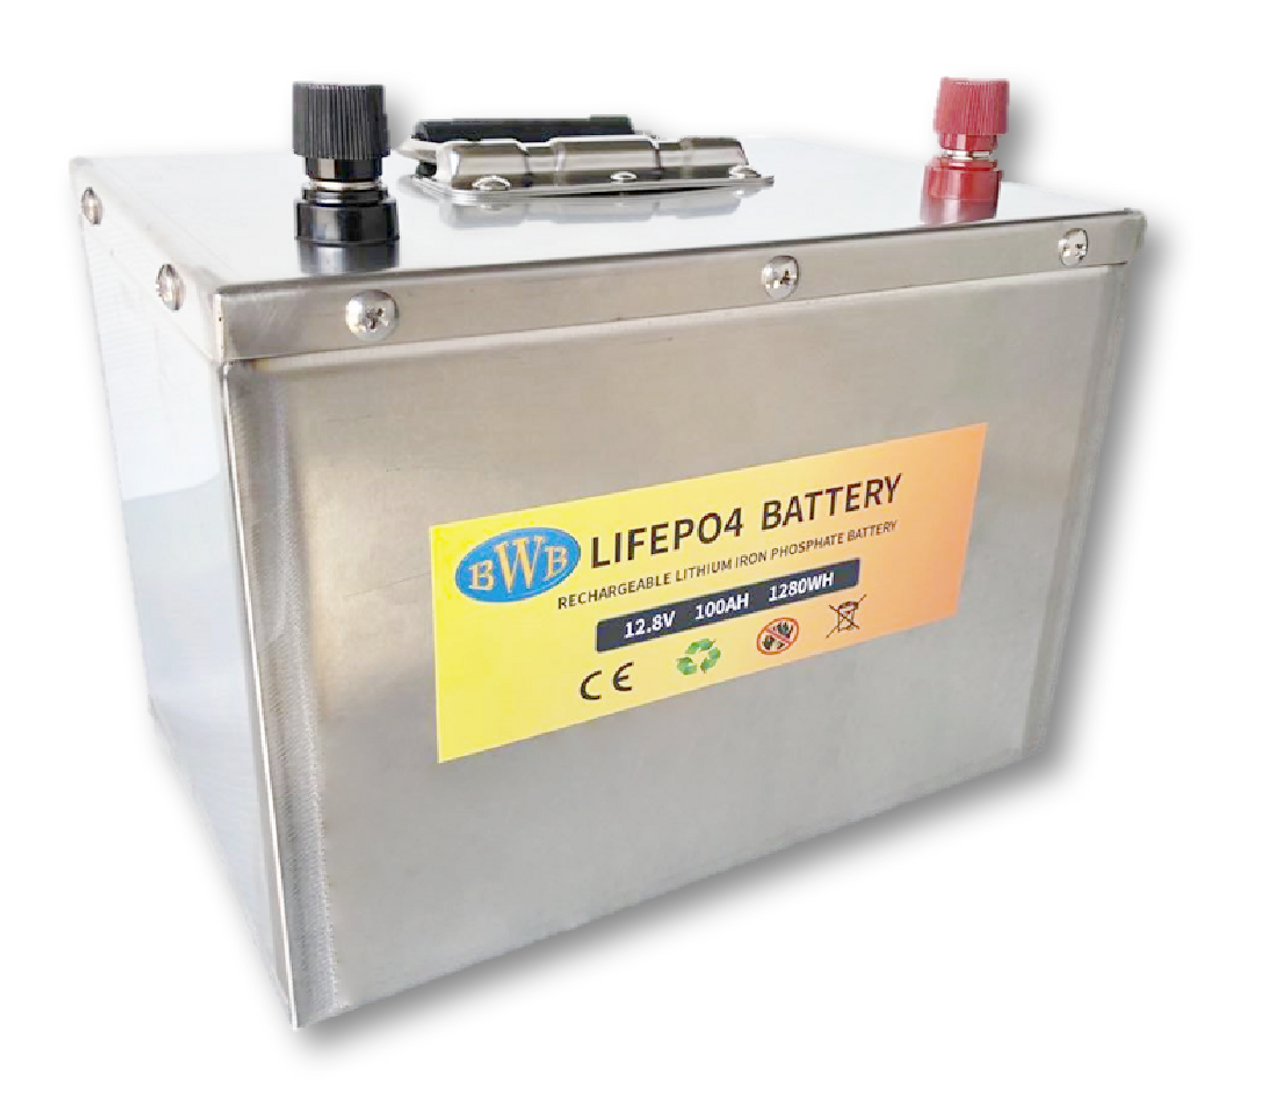 BWB 12.8V 100Ah 1280WH Lithium Iron LiFePO4 Deep Cycle Battery Stainless Box